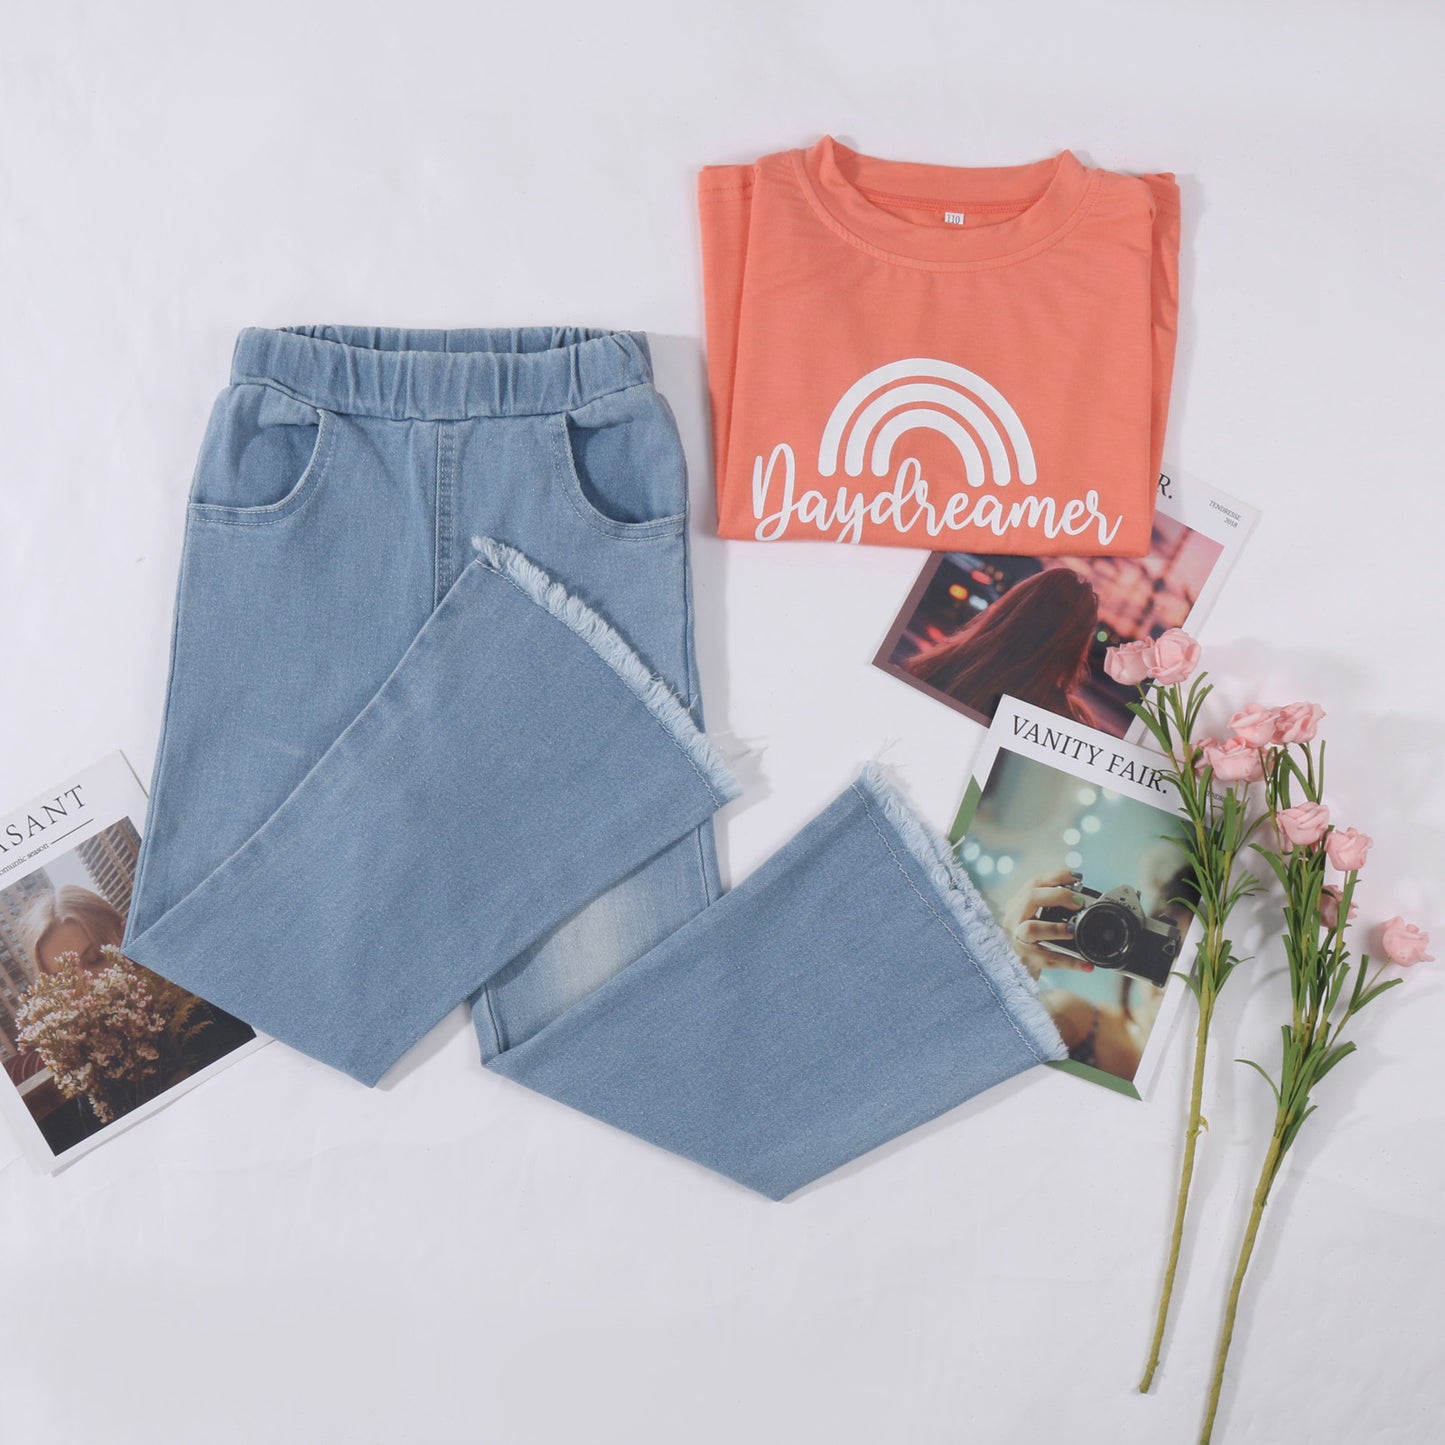 Girl's Rainbow "Daydreamer" T-shirt & Washed Jeans